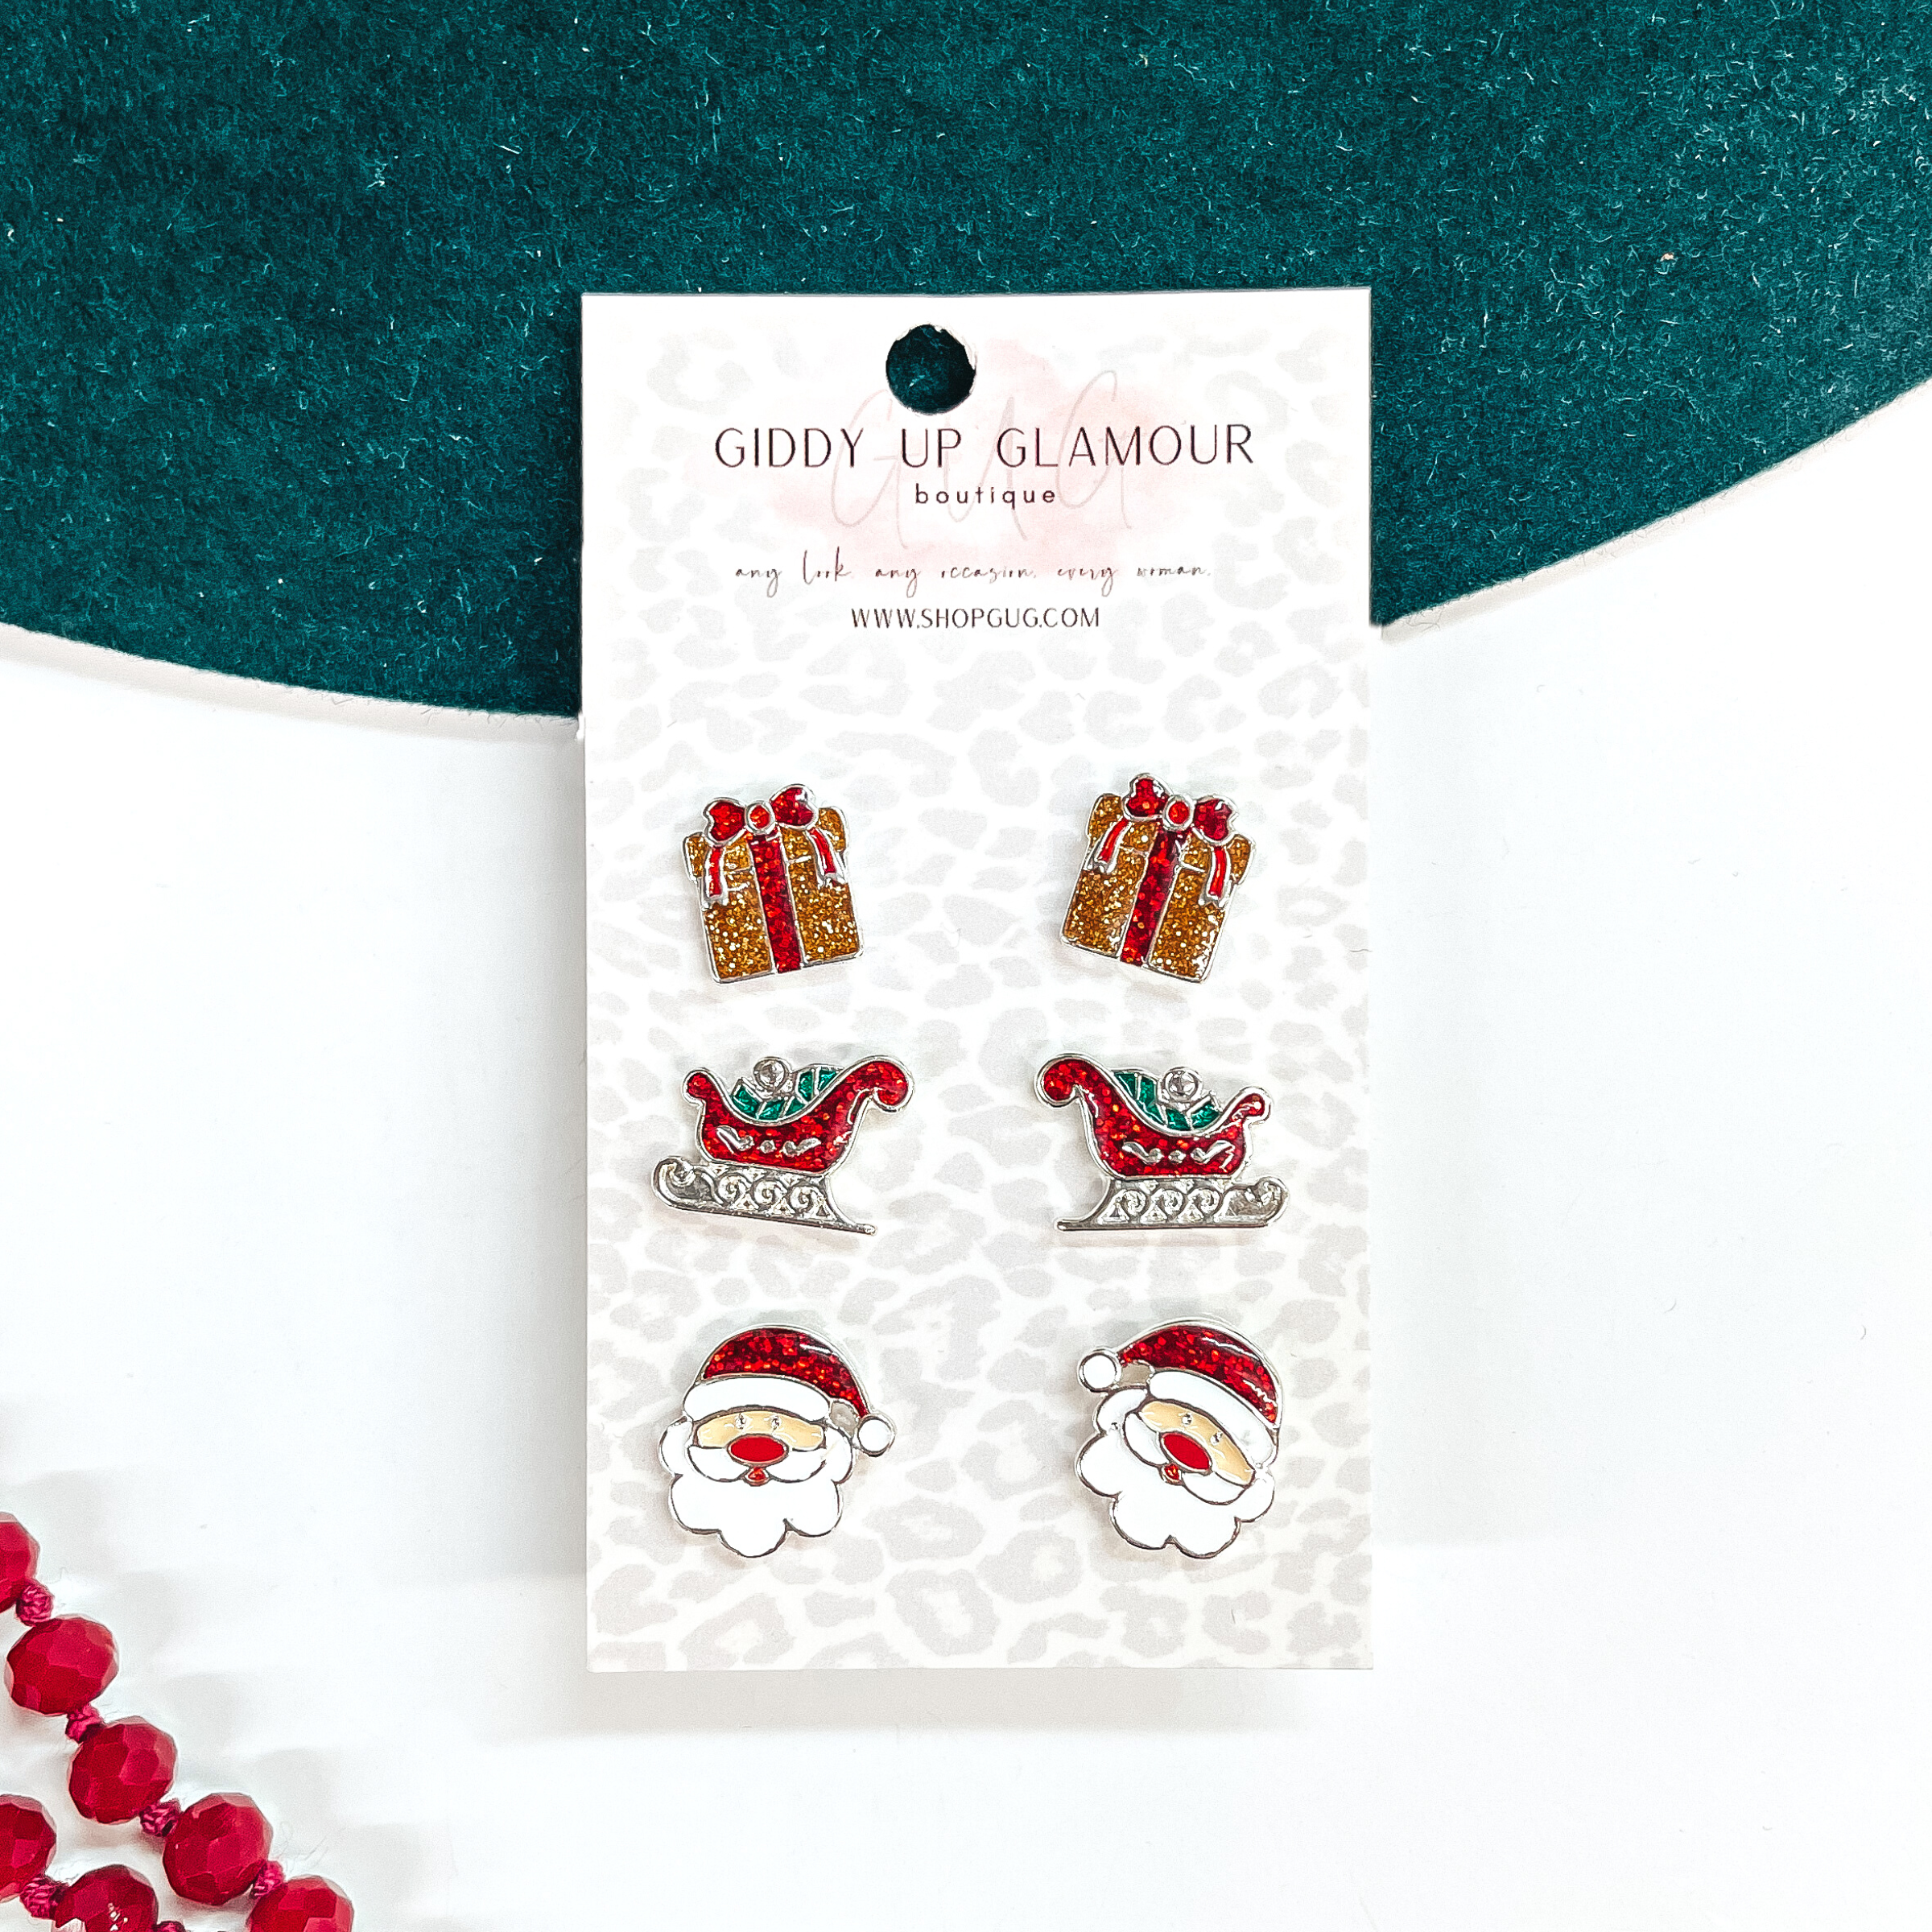 Santa Claus Earring Stud Set - Giddy Up Glamour Boutique